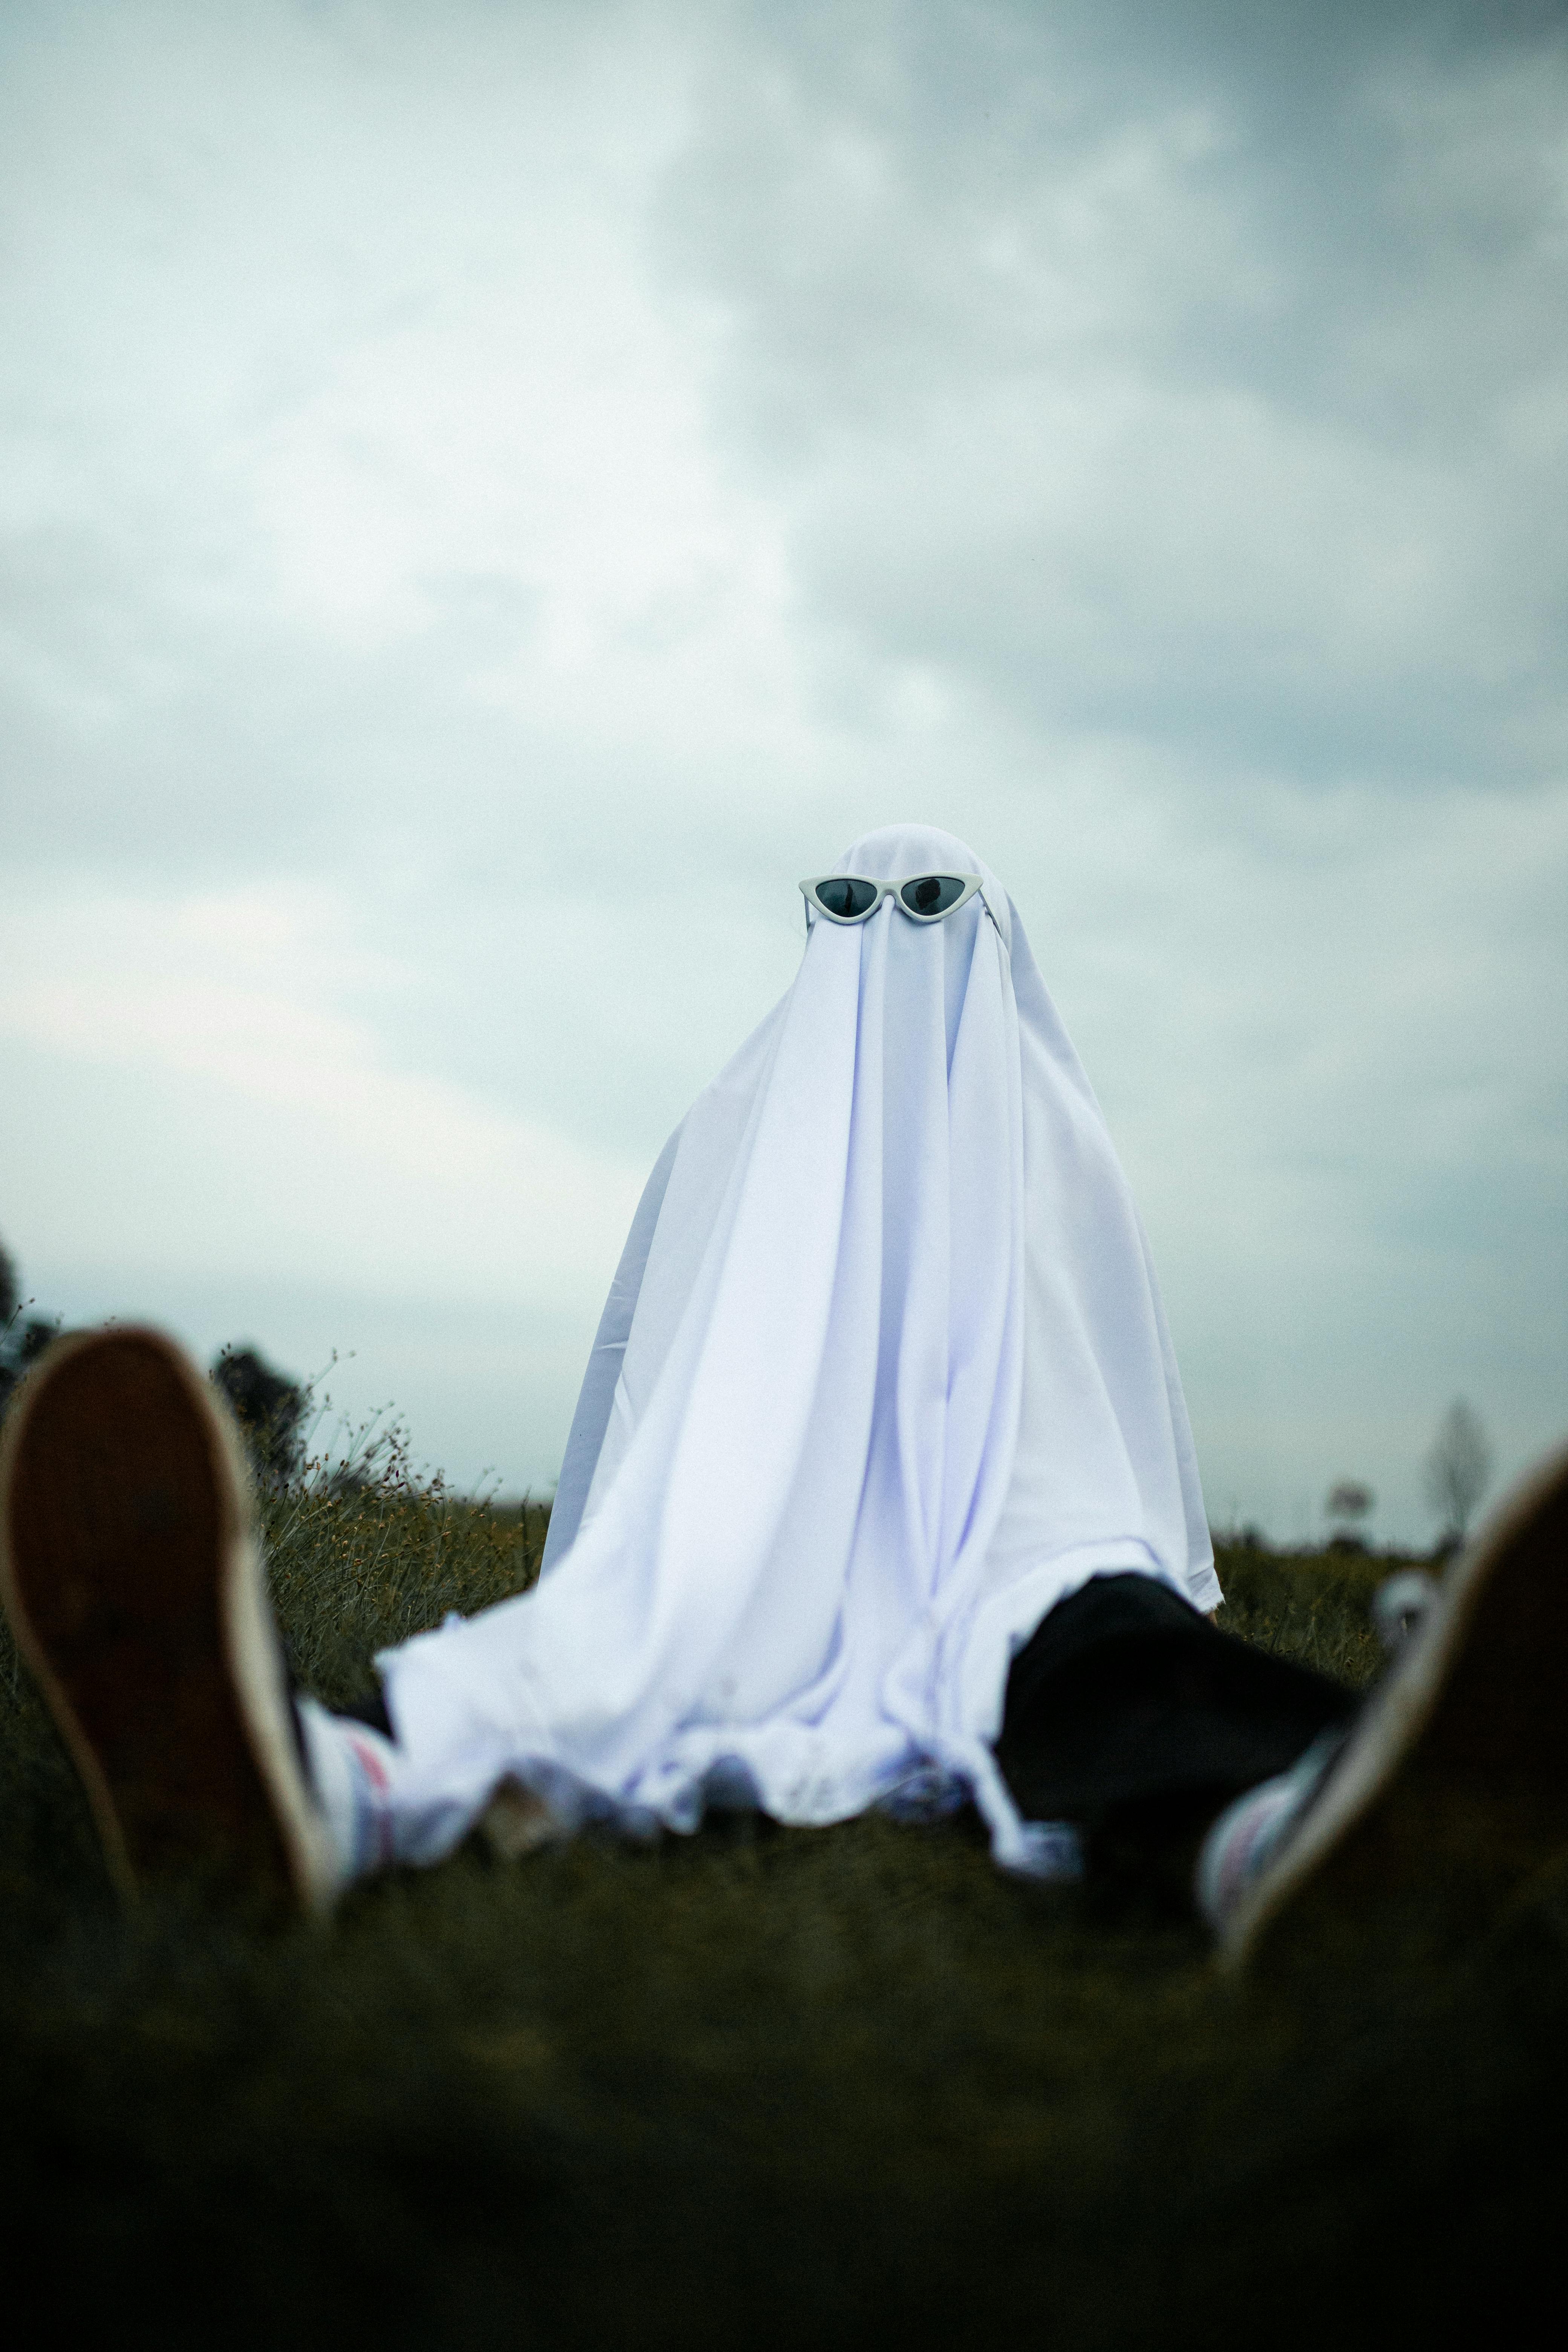 How Do Modern Dating Challenges Like Ghosting Impact Beliefs About Soulmates?